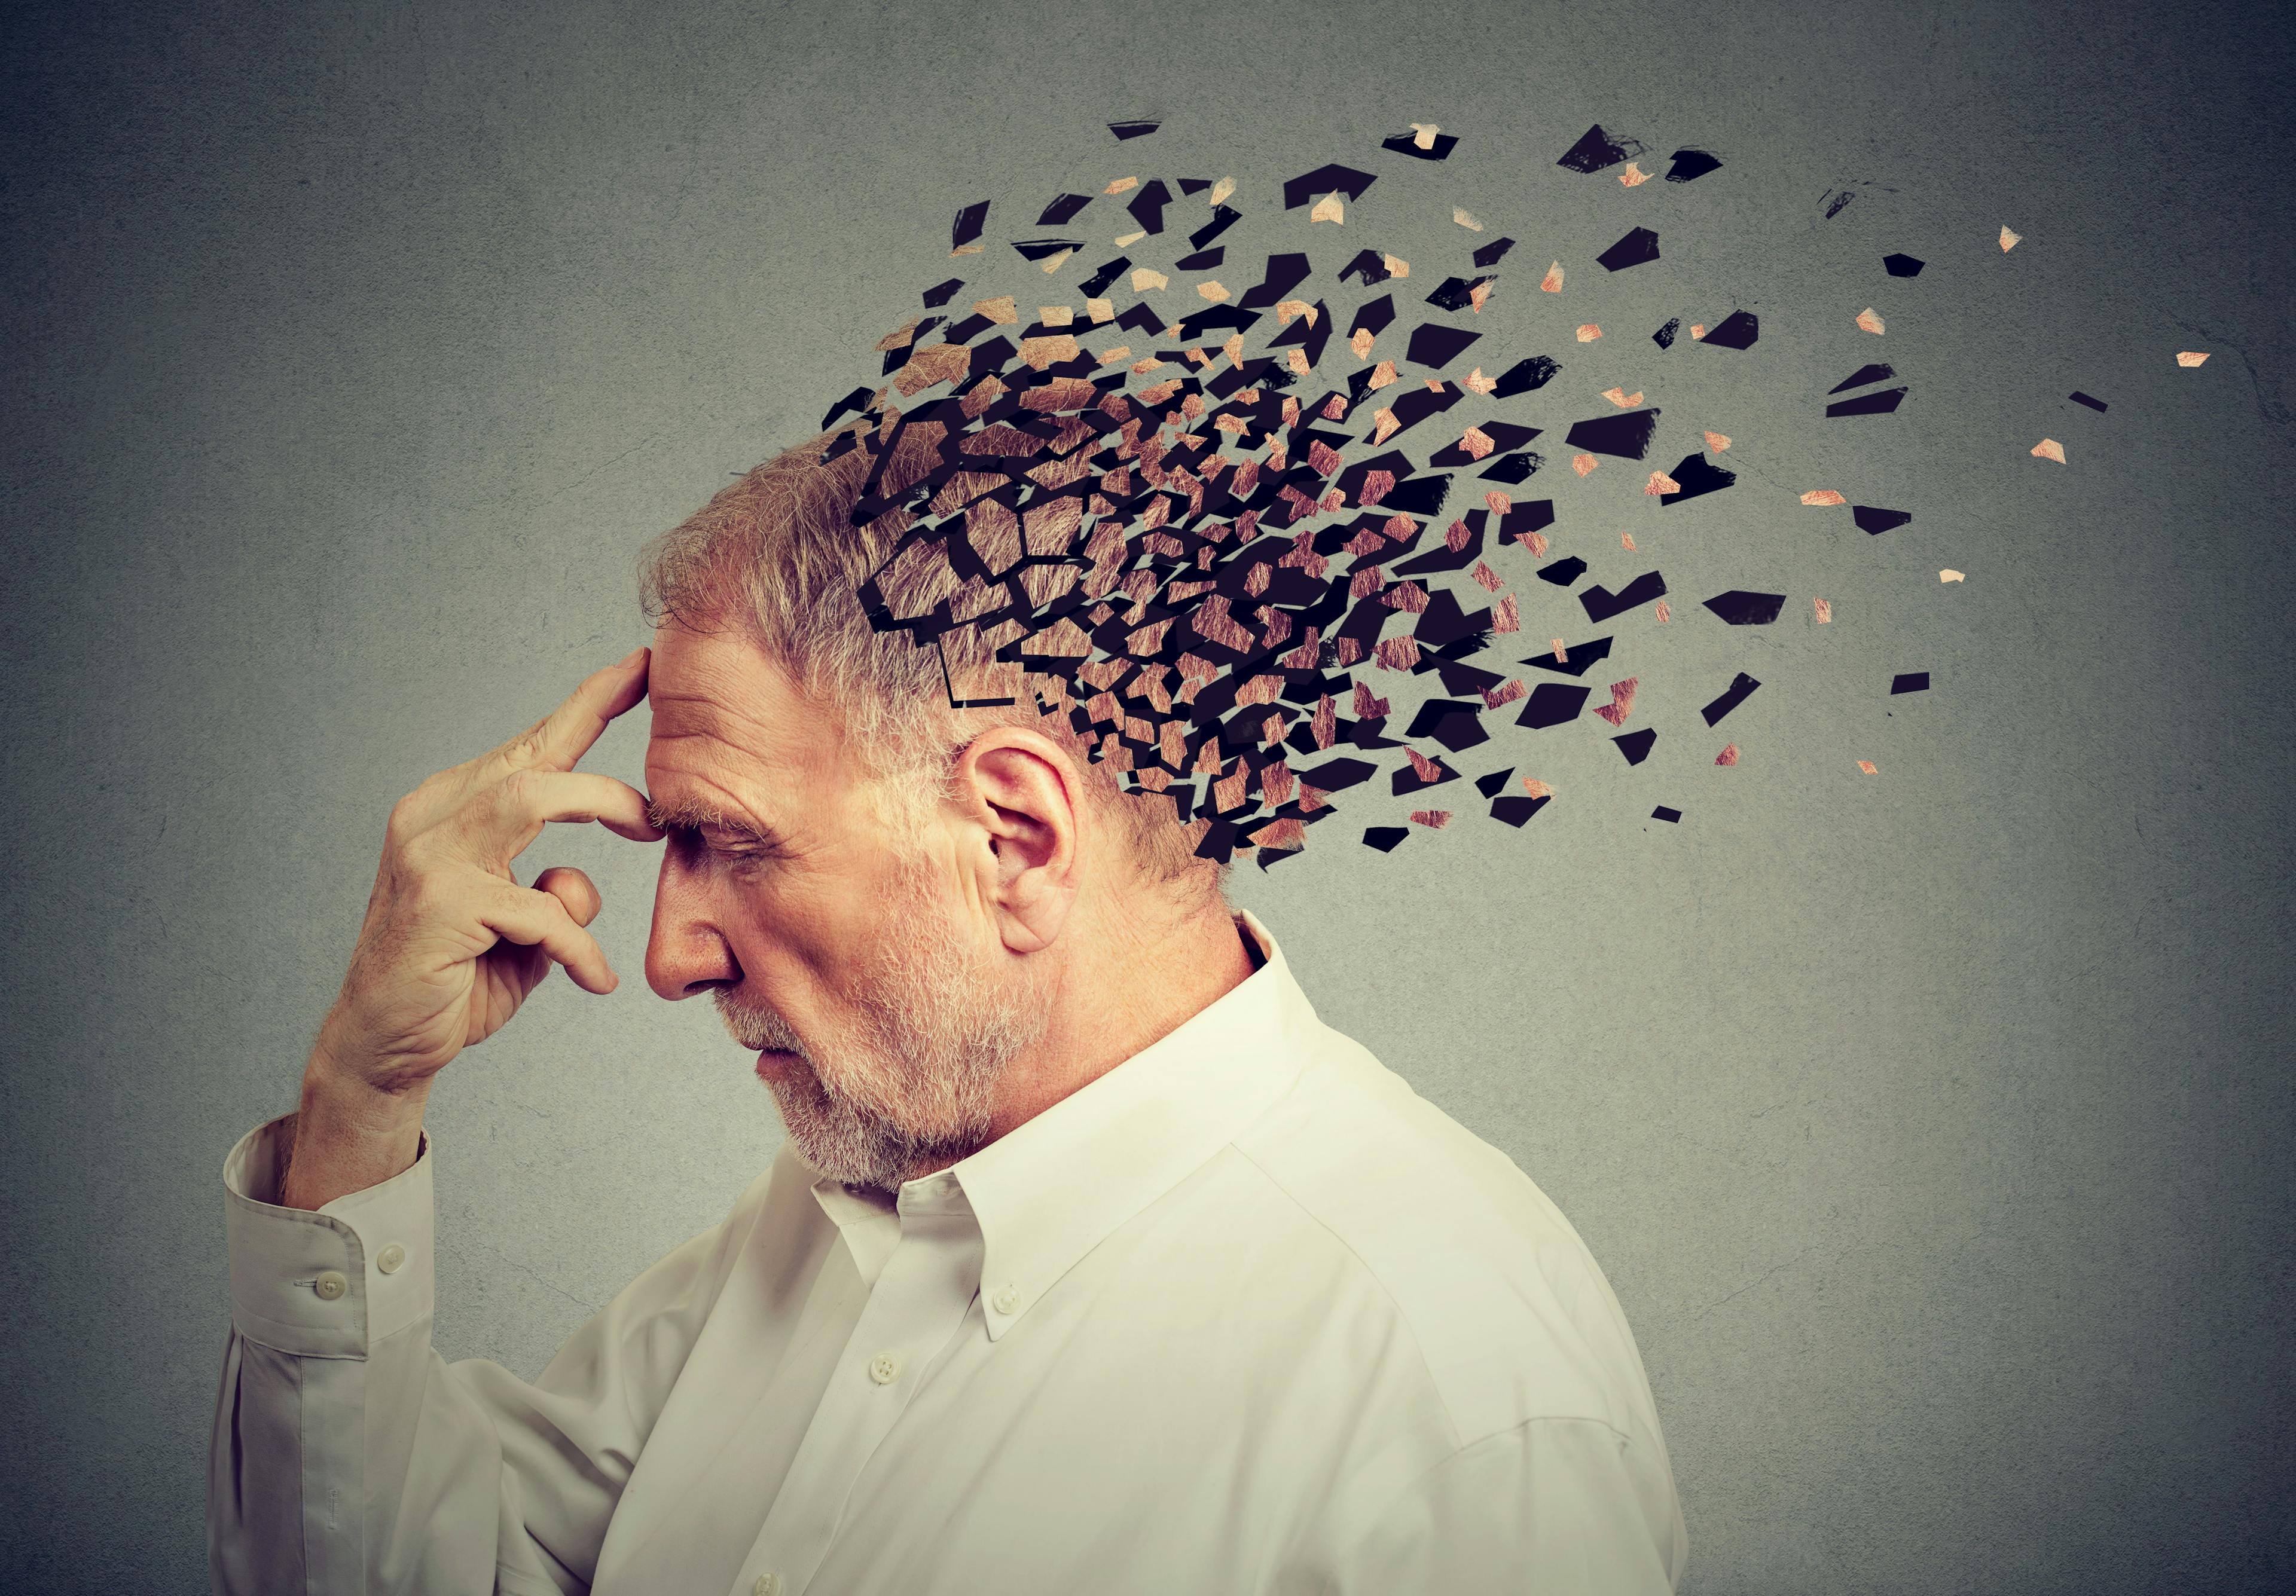 Memory loss due to dementia. Senior man losing parts of head as symbol of decreased mind function. | Image Credit: pathdoc - stock.adobe.com